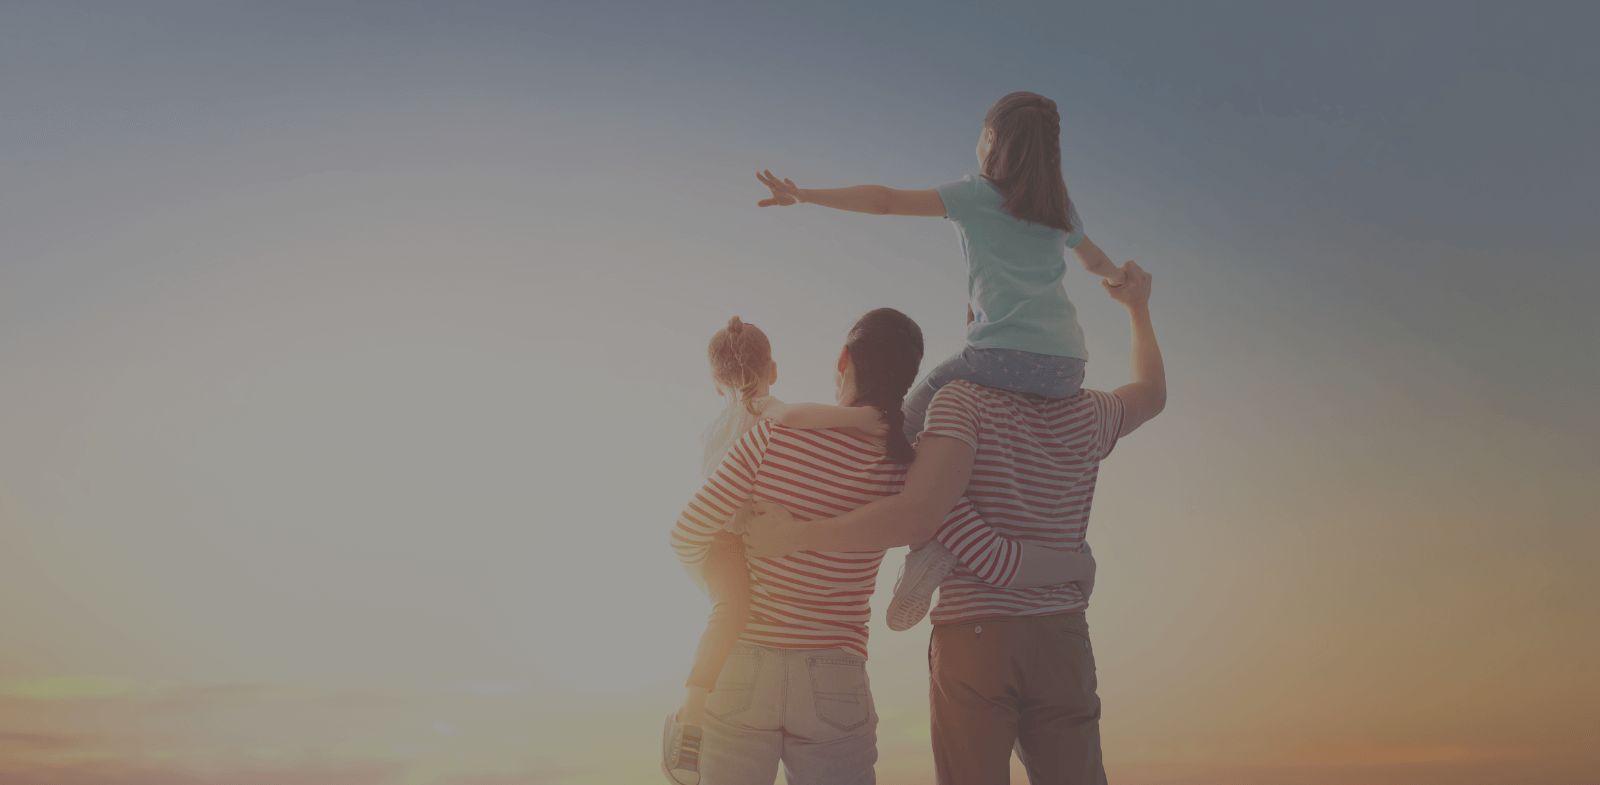 stock photo of family at sunset